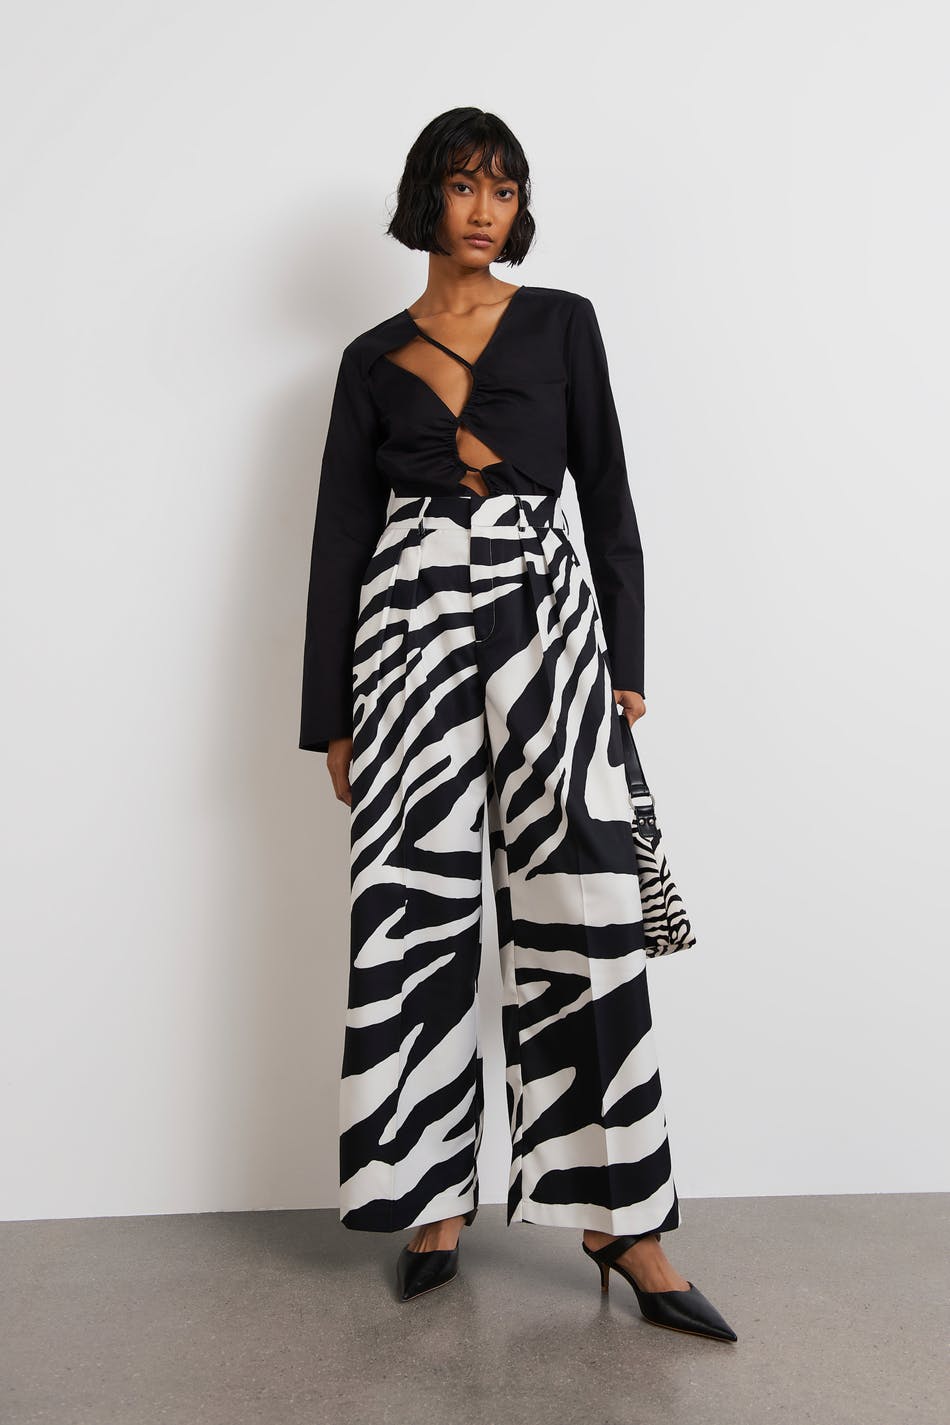 How to Wear Zebra Print Pants? 21 Outfits with Zebra Pants